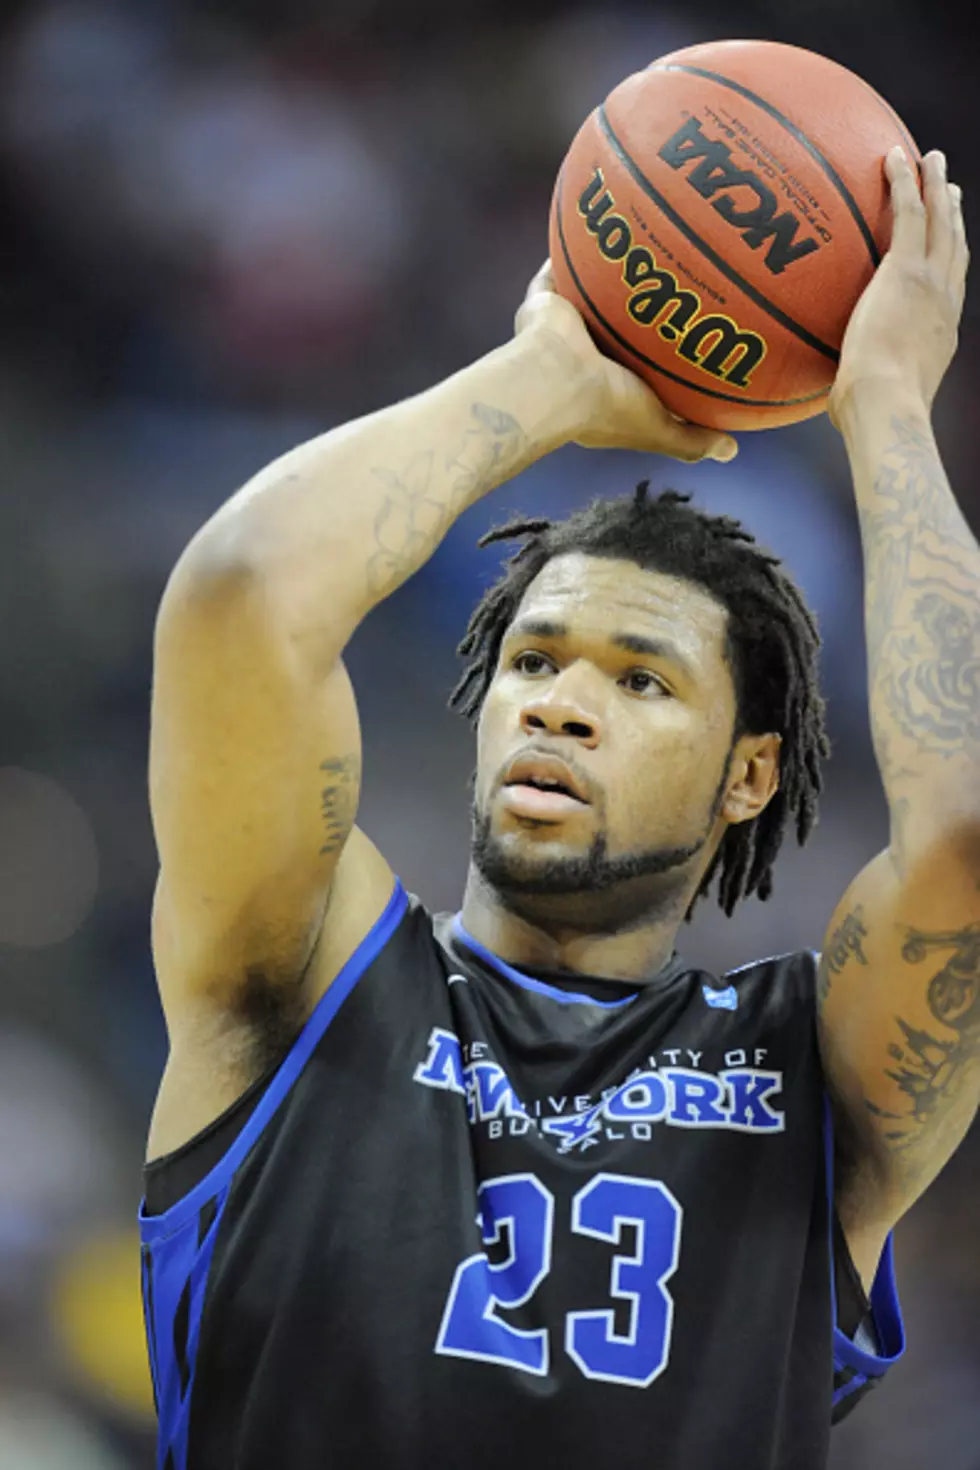 UB Basketball Star Faces Theft Accusations [VIDEO]